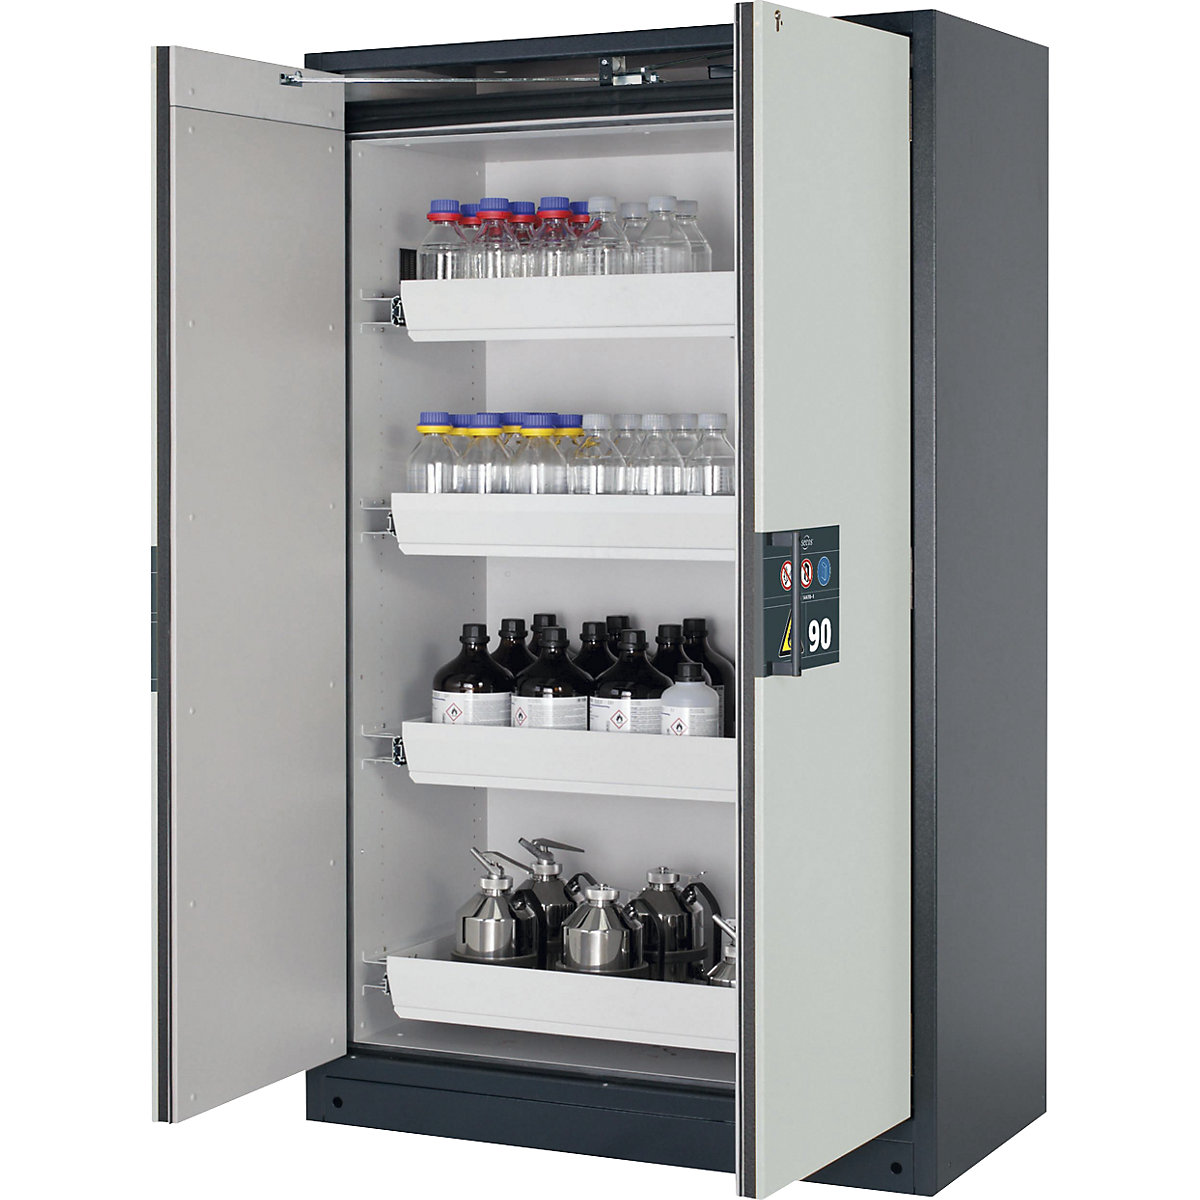 Fire resistant hazardous goods storage cupboard type 90, semi-automatic – asecos, with 4 drawers, door colour grey-13